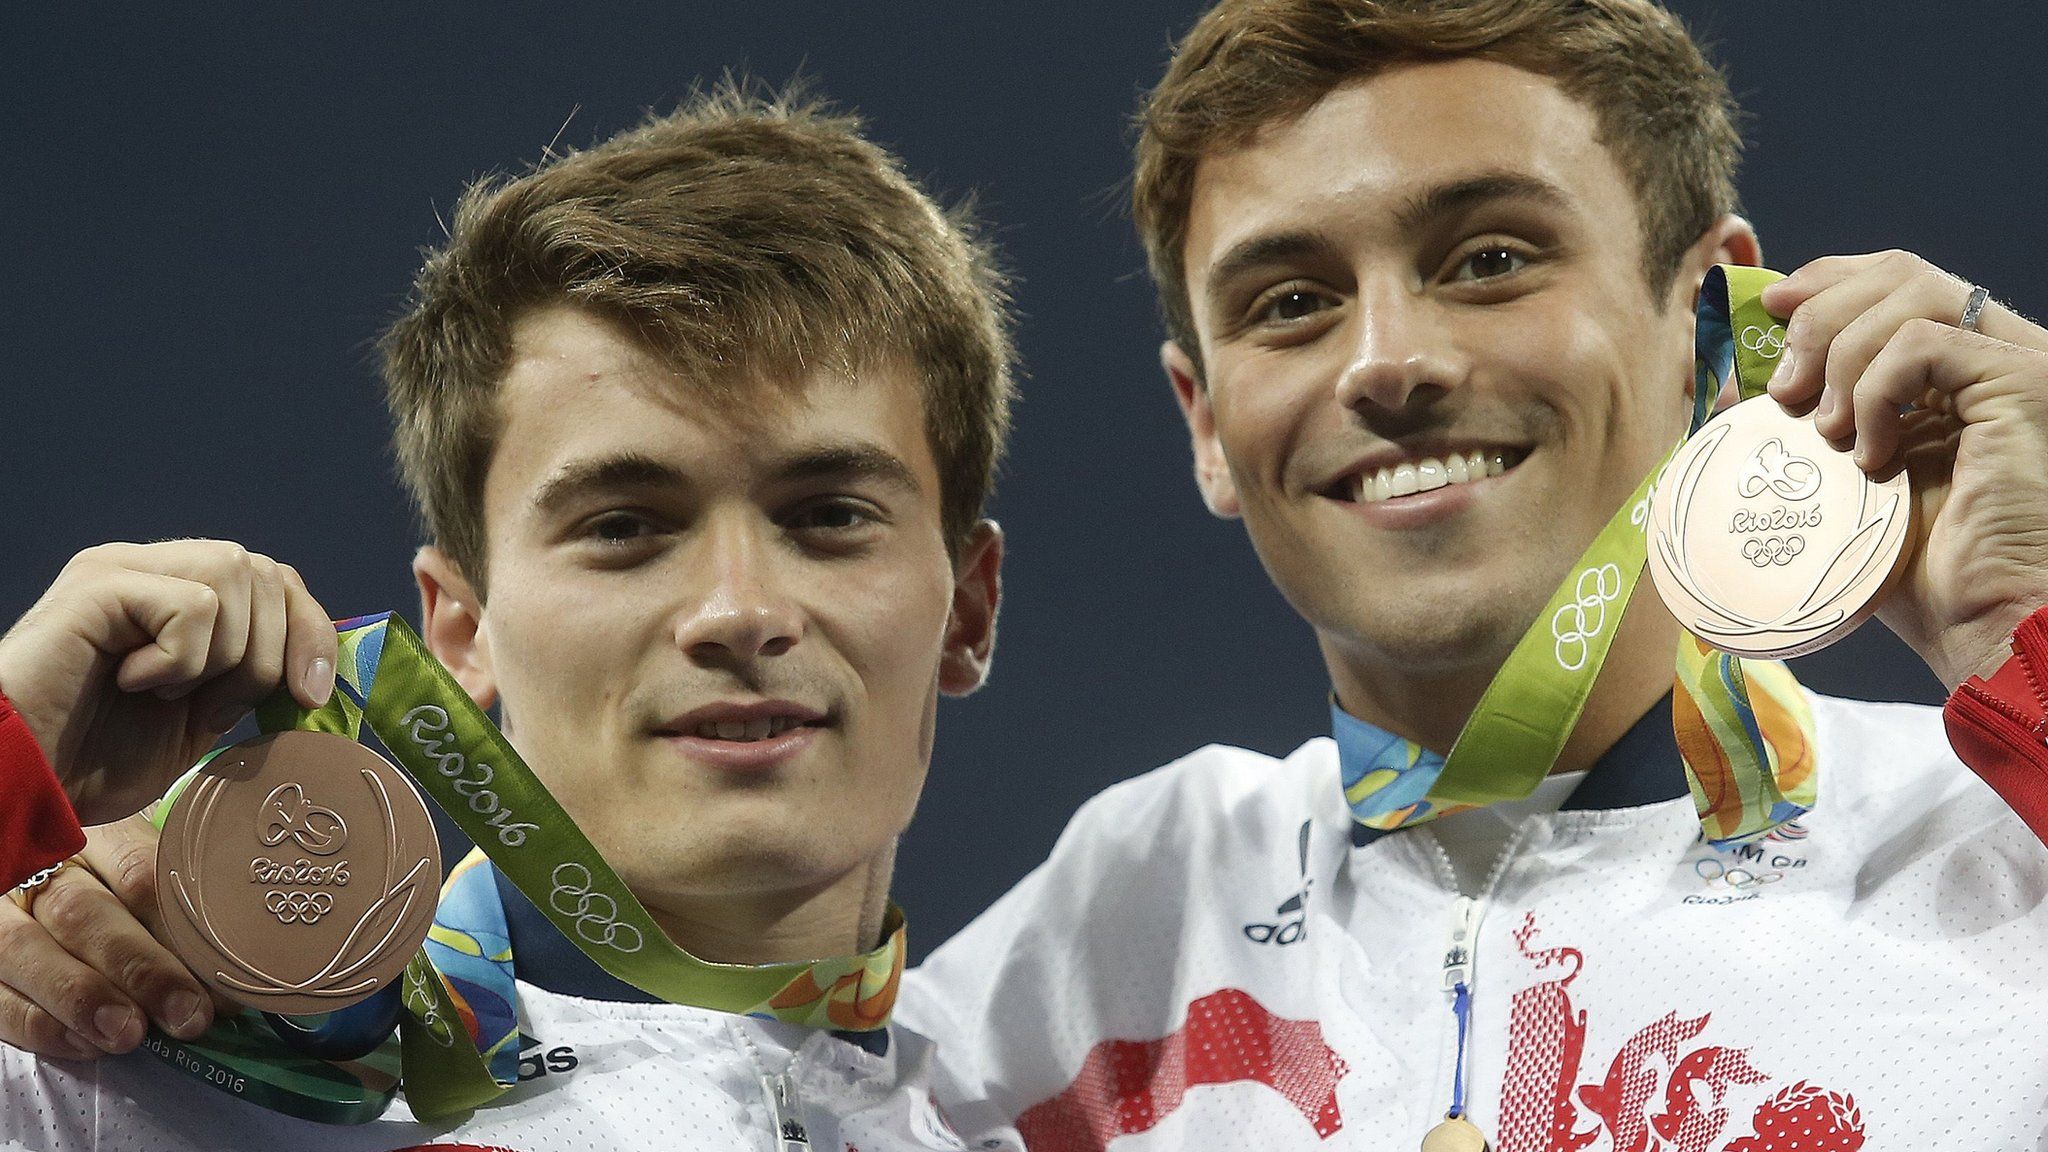 Daniel Goodfellow and Tom Daley